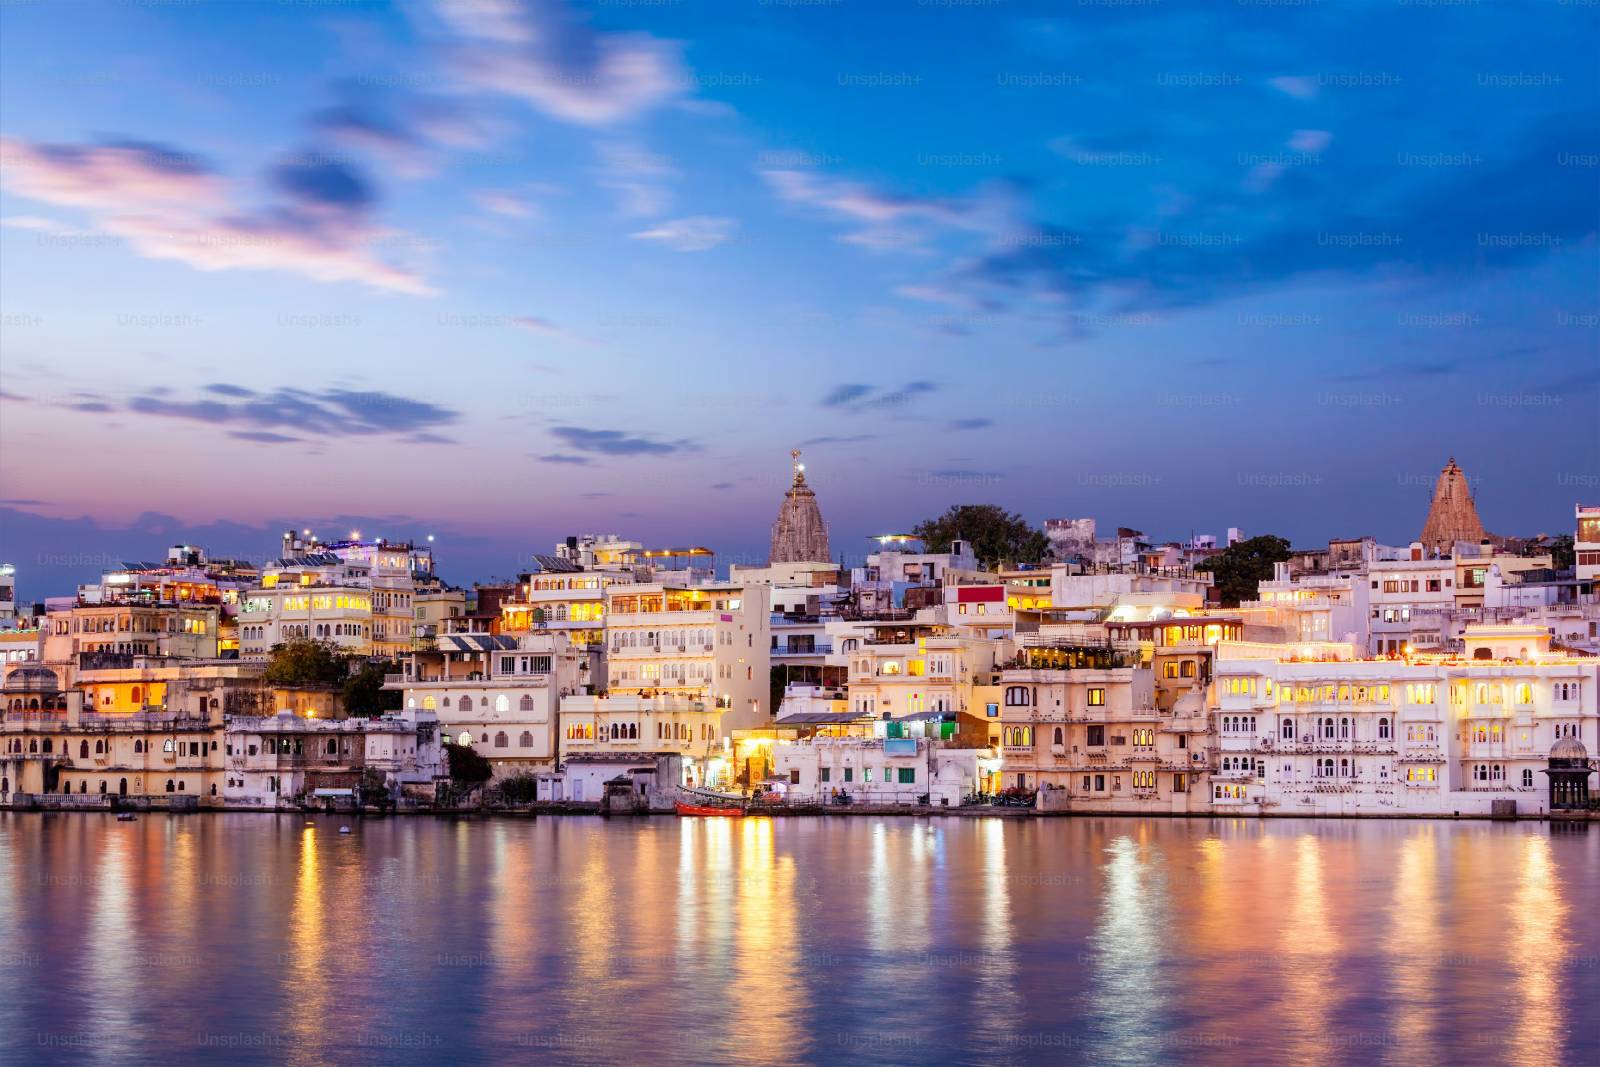 Facts about Udaipur